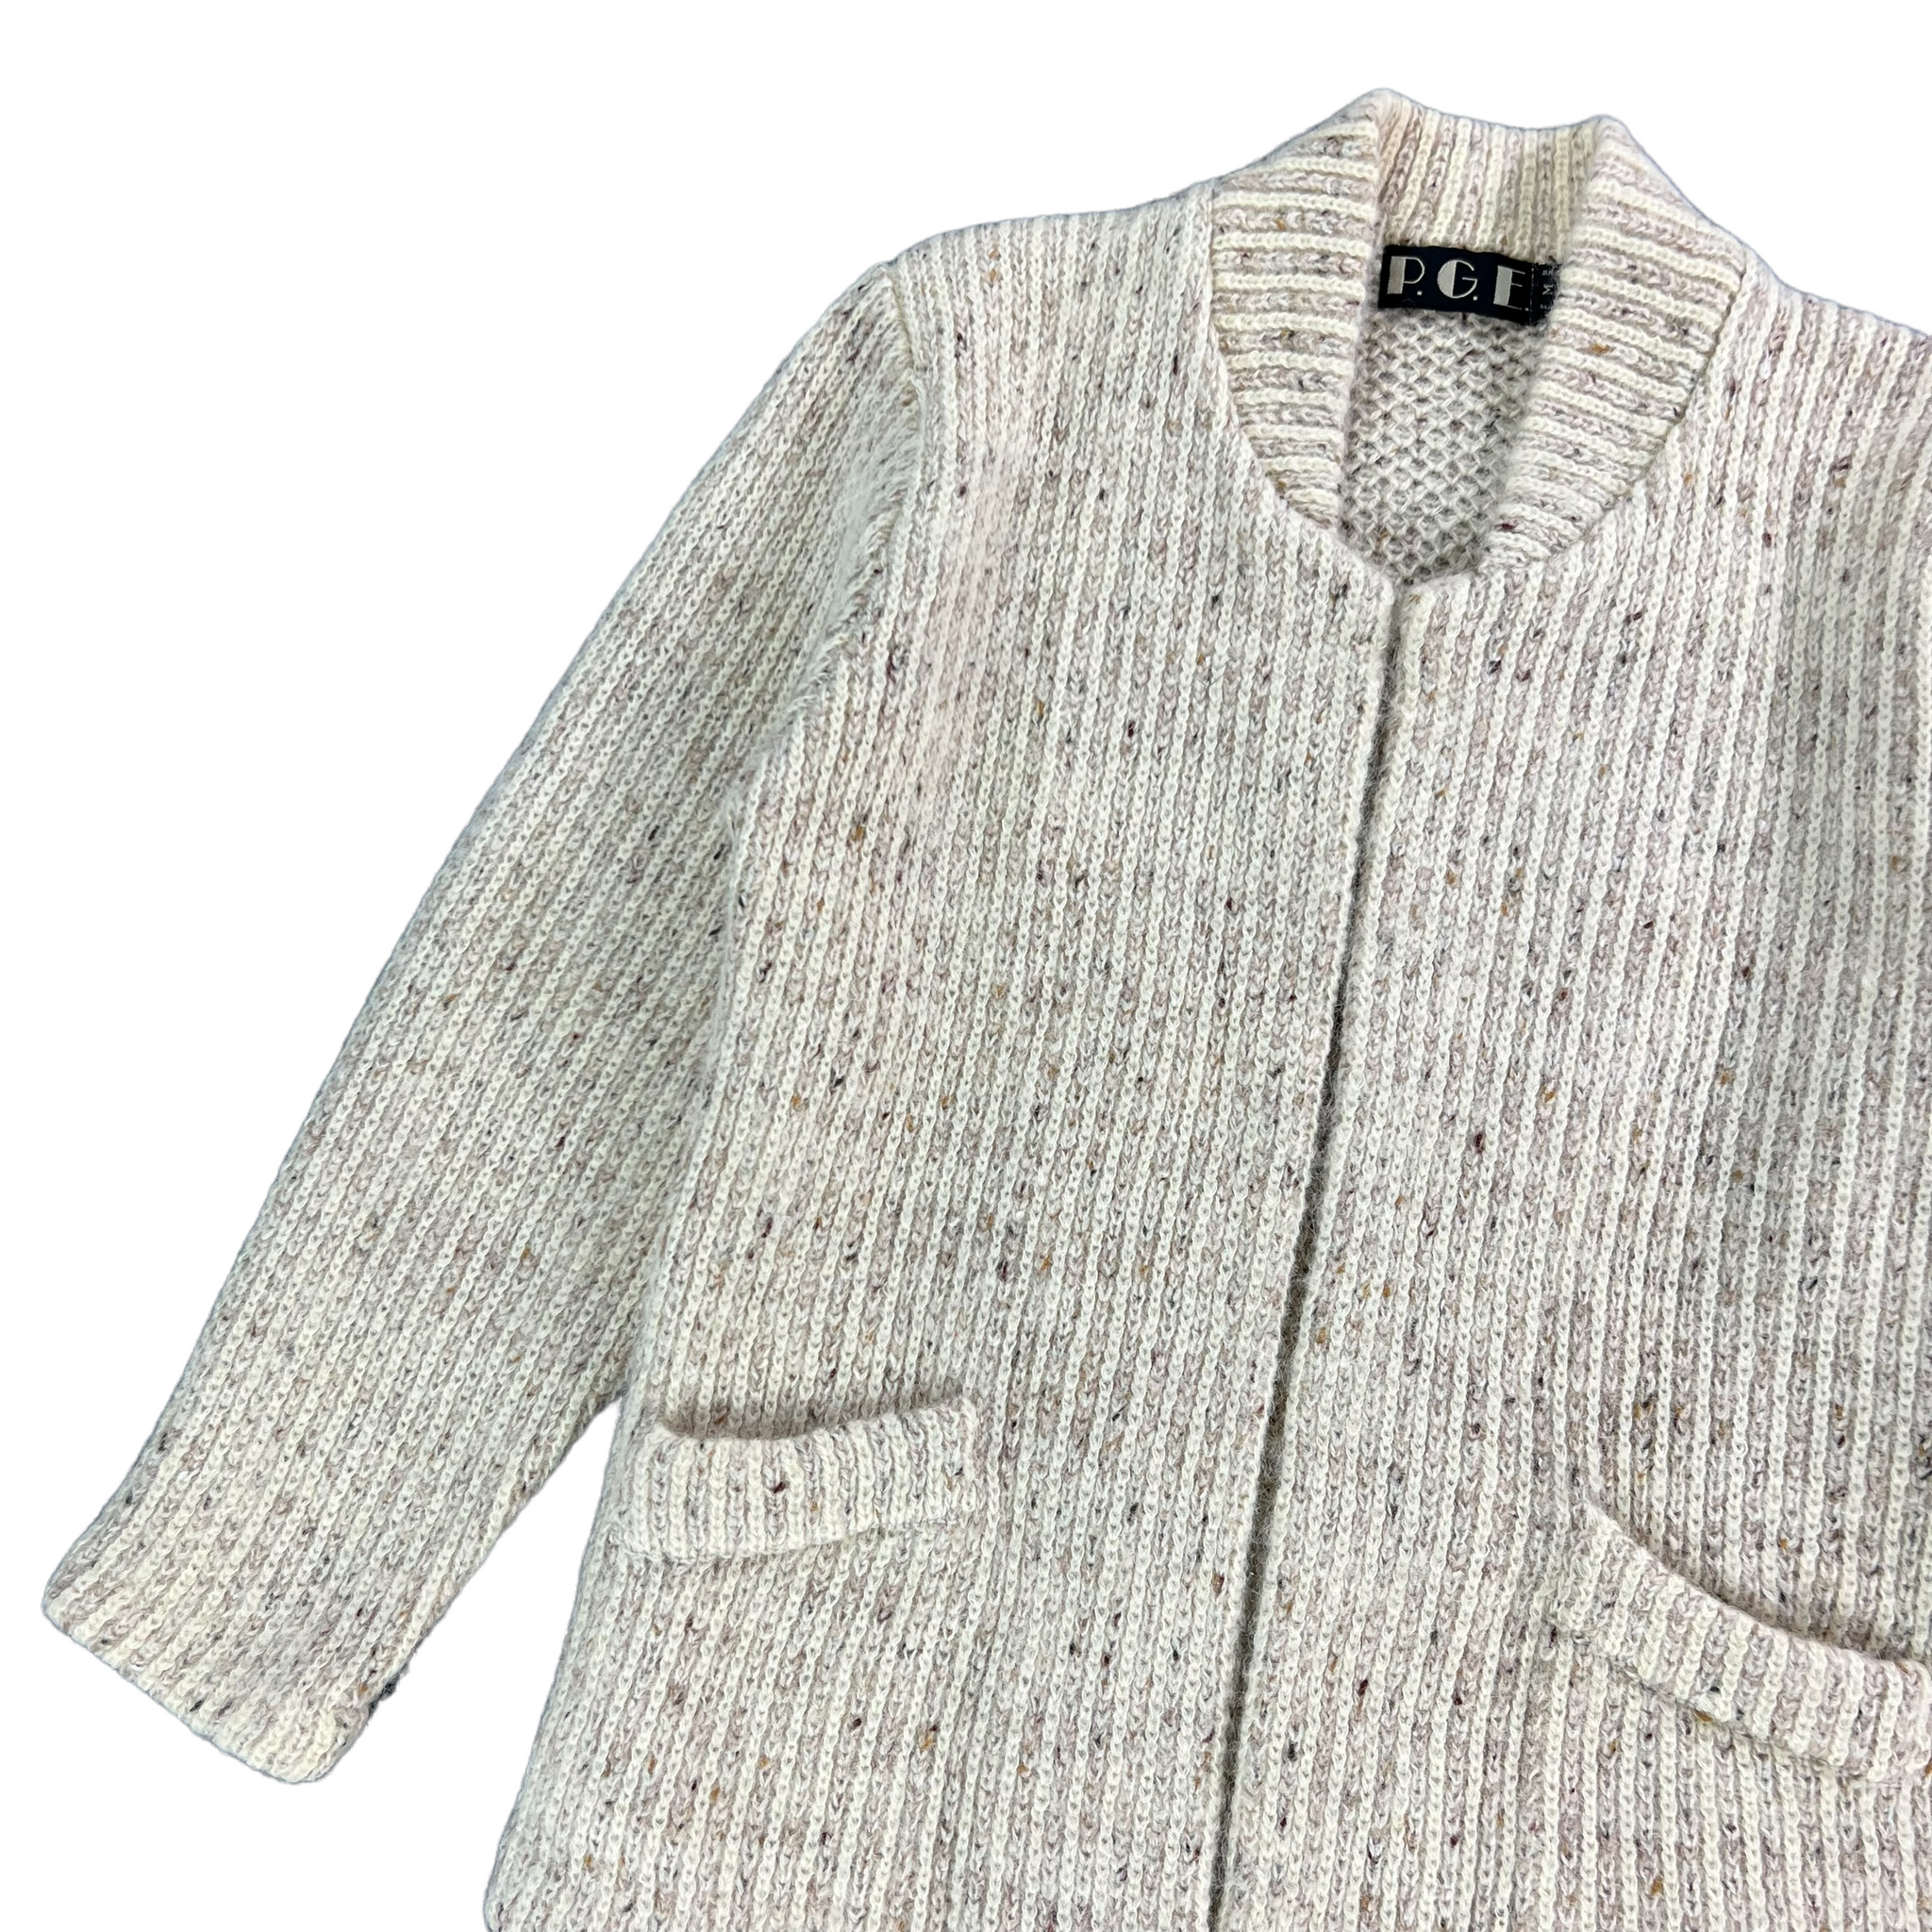 Vintage 90s PGE Mohair wool blend cardigan sweater (M) – The Retro